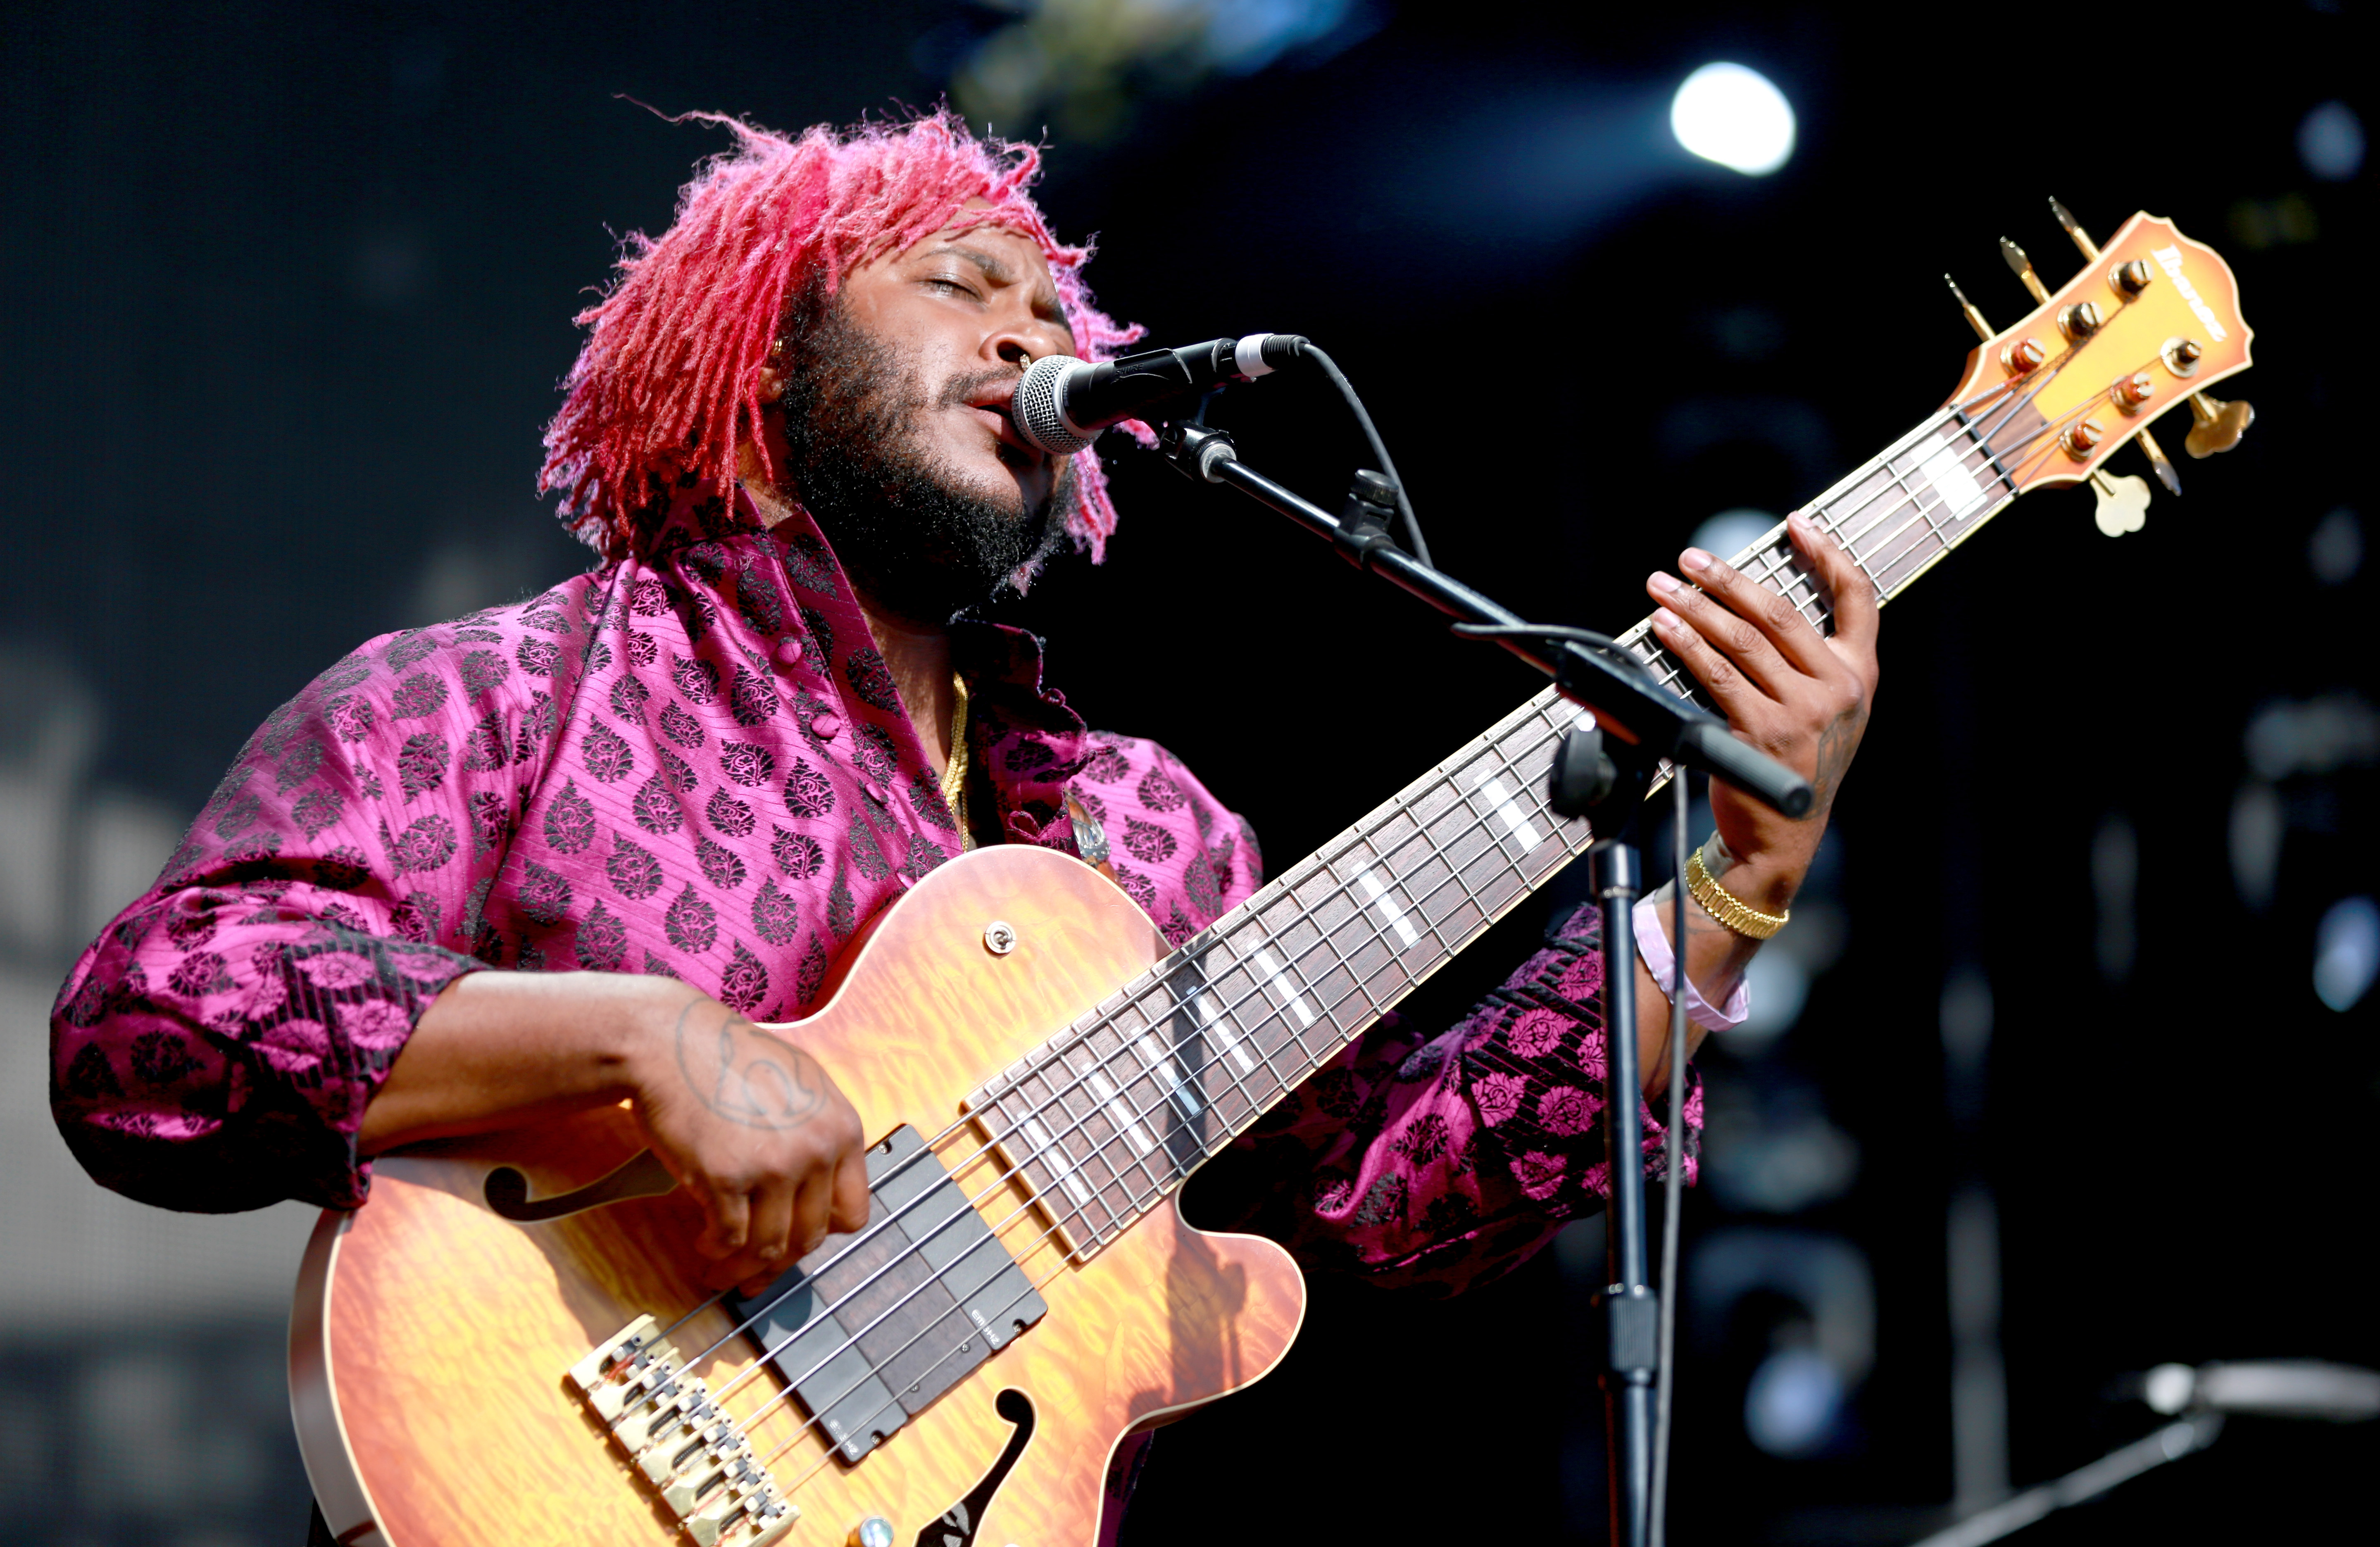 Thundercat Show Interrupted By Local Singer Looking For Her Moment